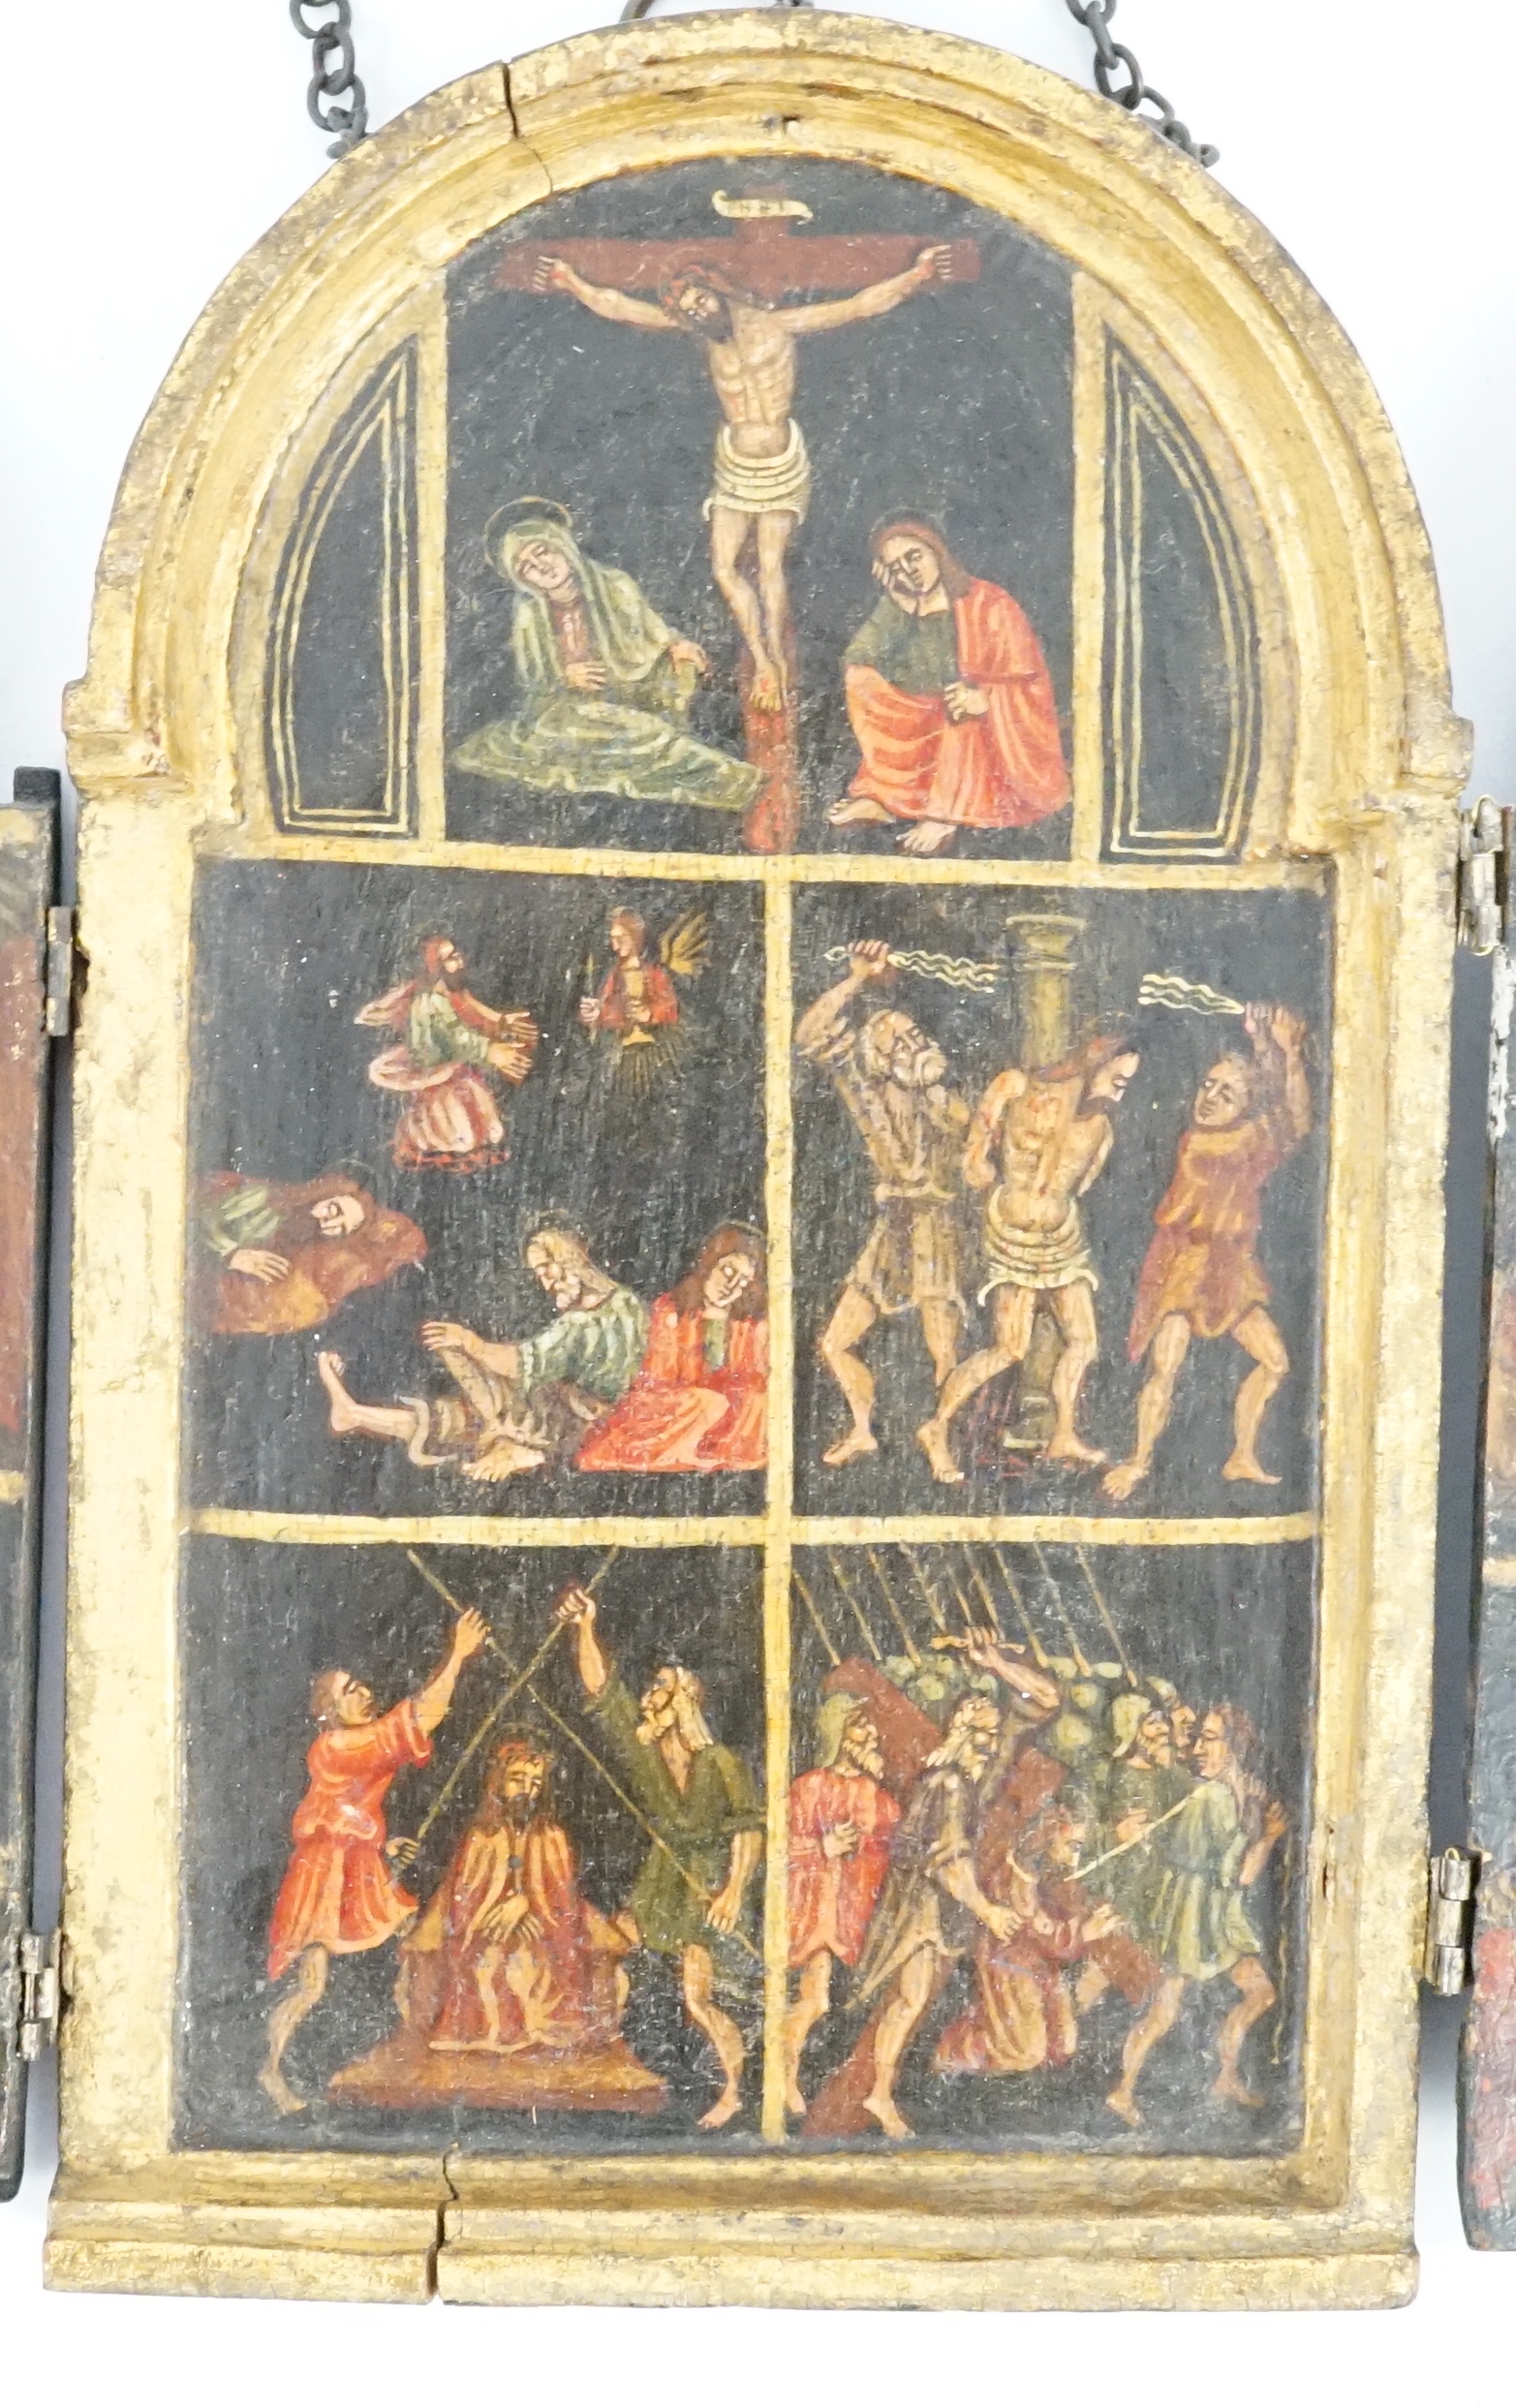 A 17th century triptych case, oil on wood, Icon depicting the life of Christ, with a Saint receiving stigmata on one of the two doors, 11.5cm wide, 18.75cm high, when opened out 33.5cm wide